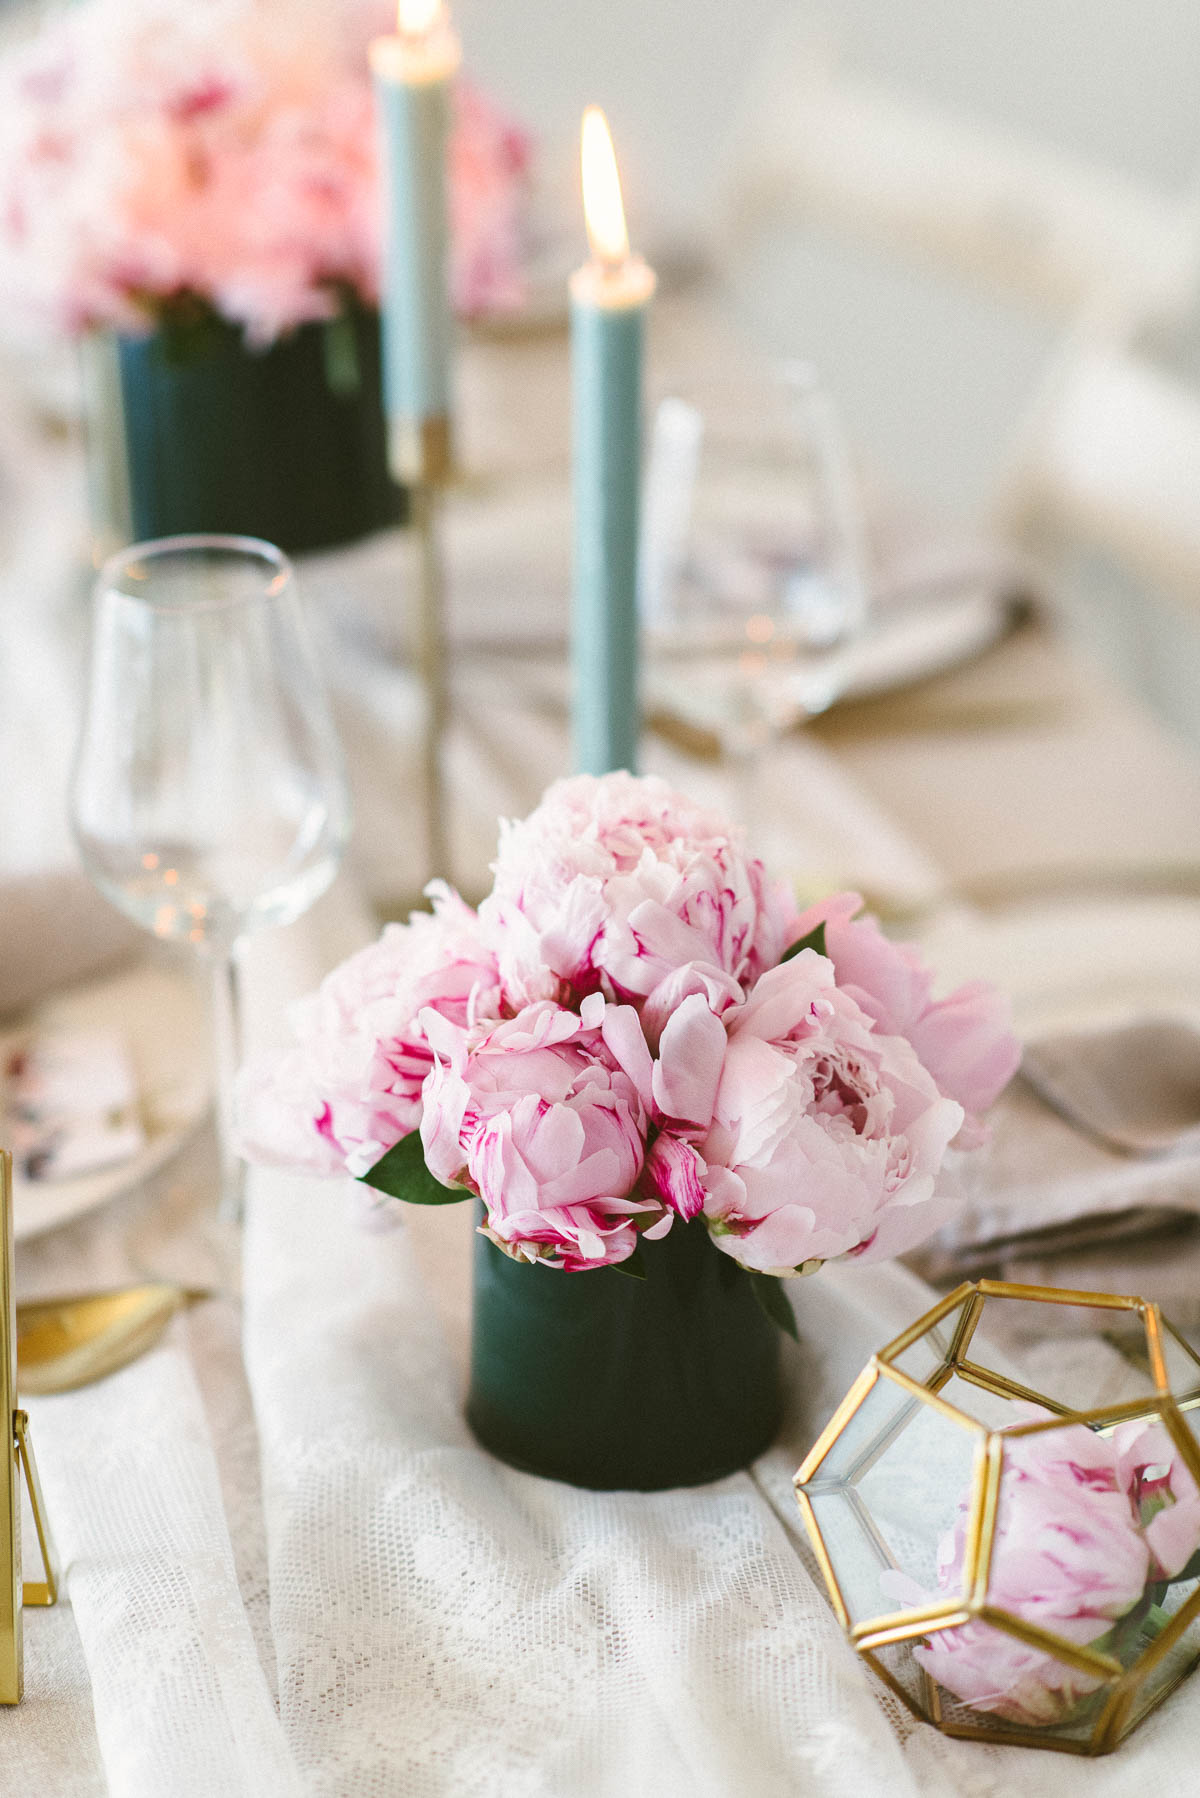 1646664910 654 Wedding decoration with peonies in an elegant boho style - Wedding decoration with peonies in an elegant boho style